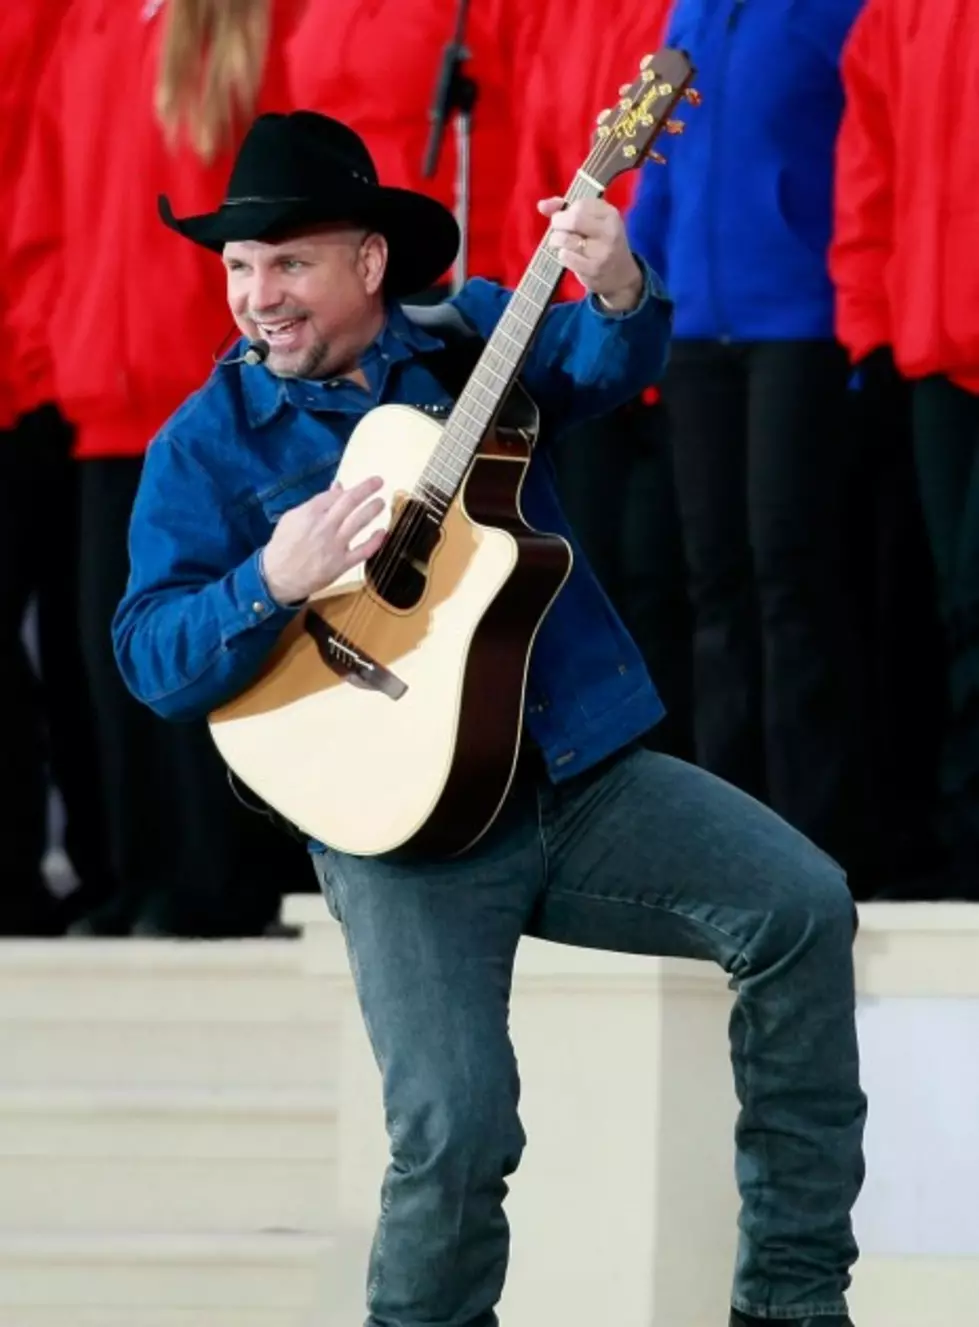 More Garth Brooks Concert Tickets Released!